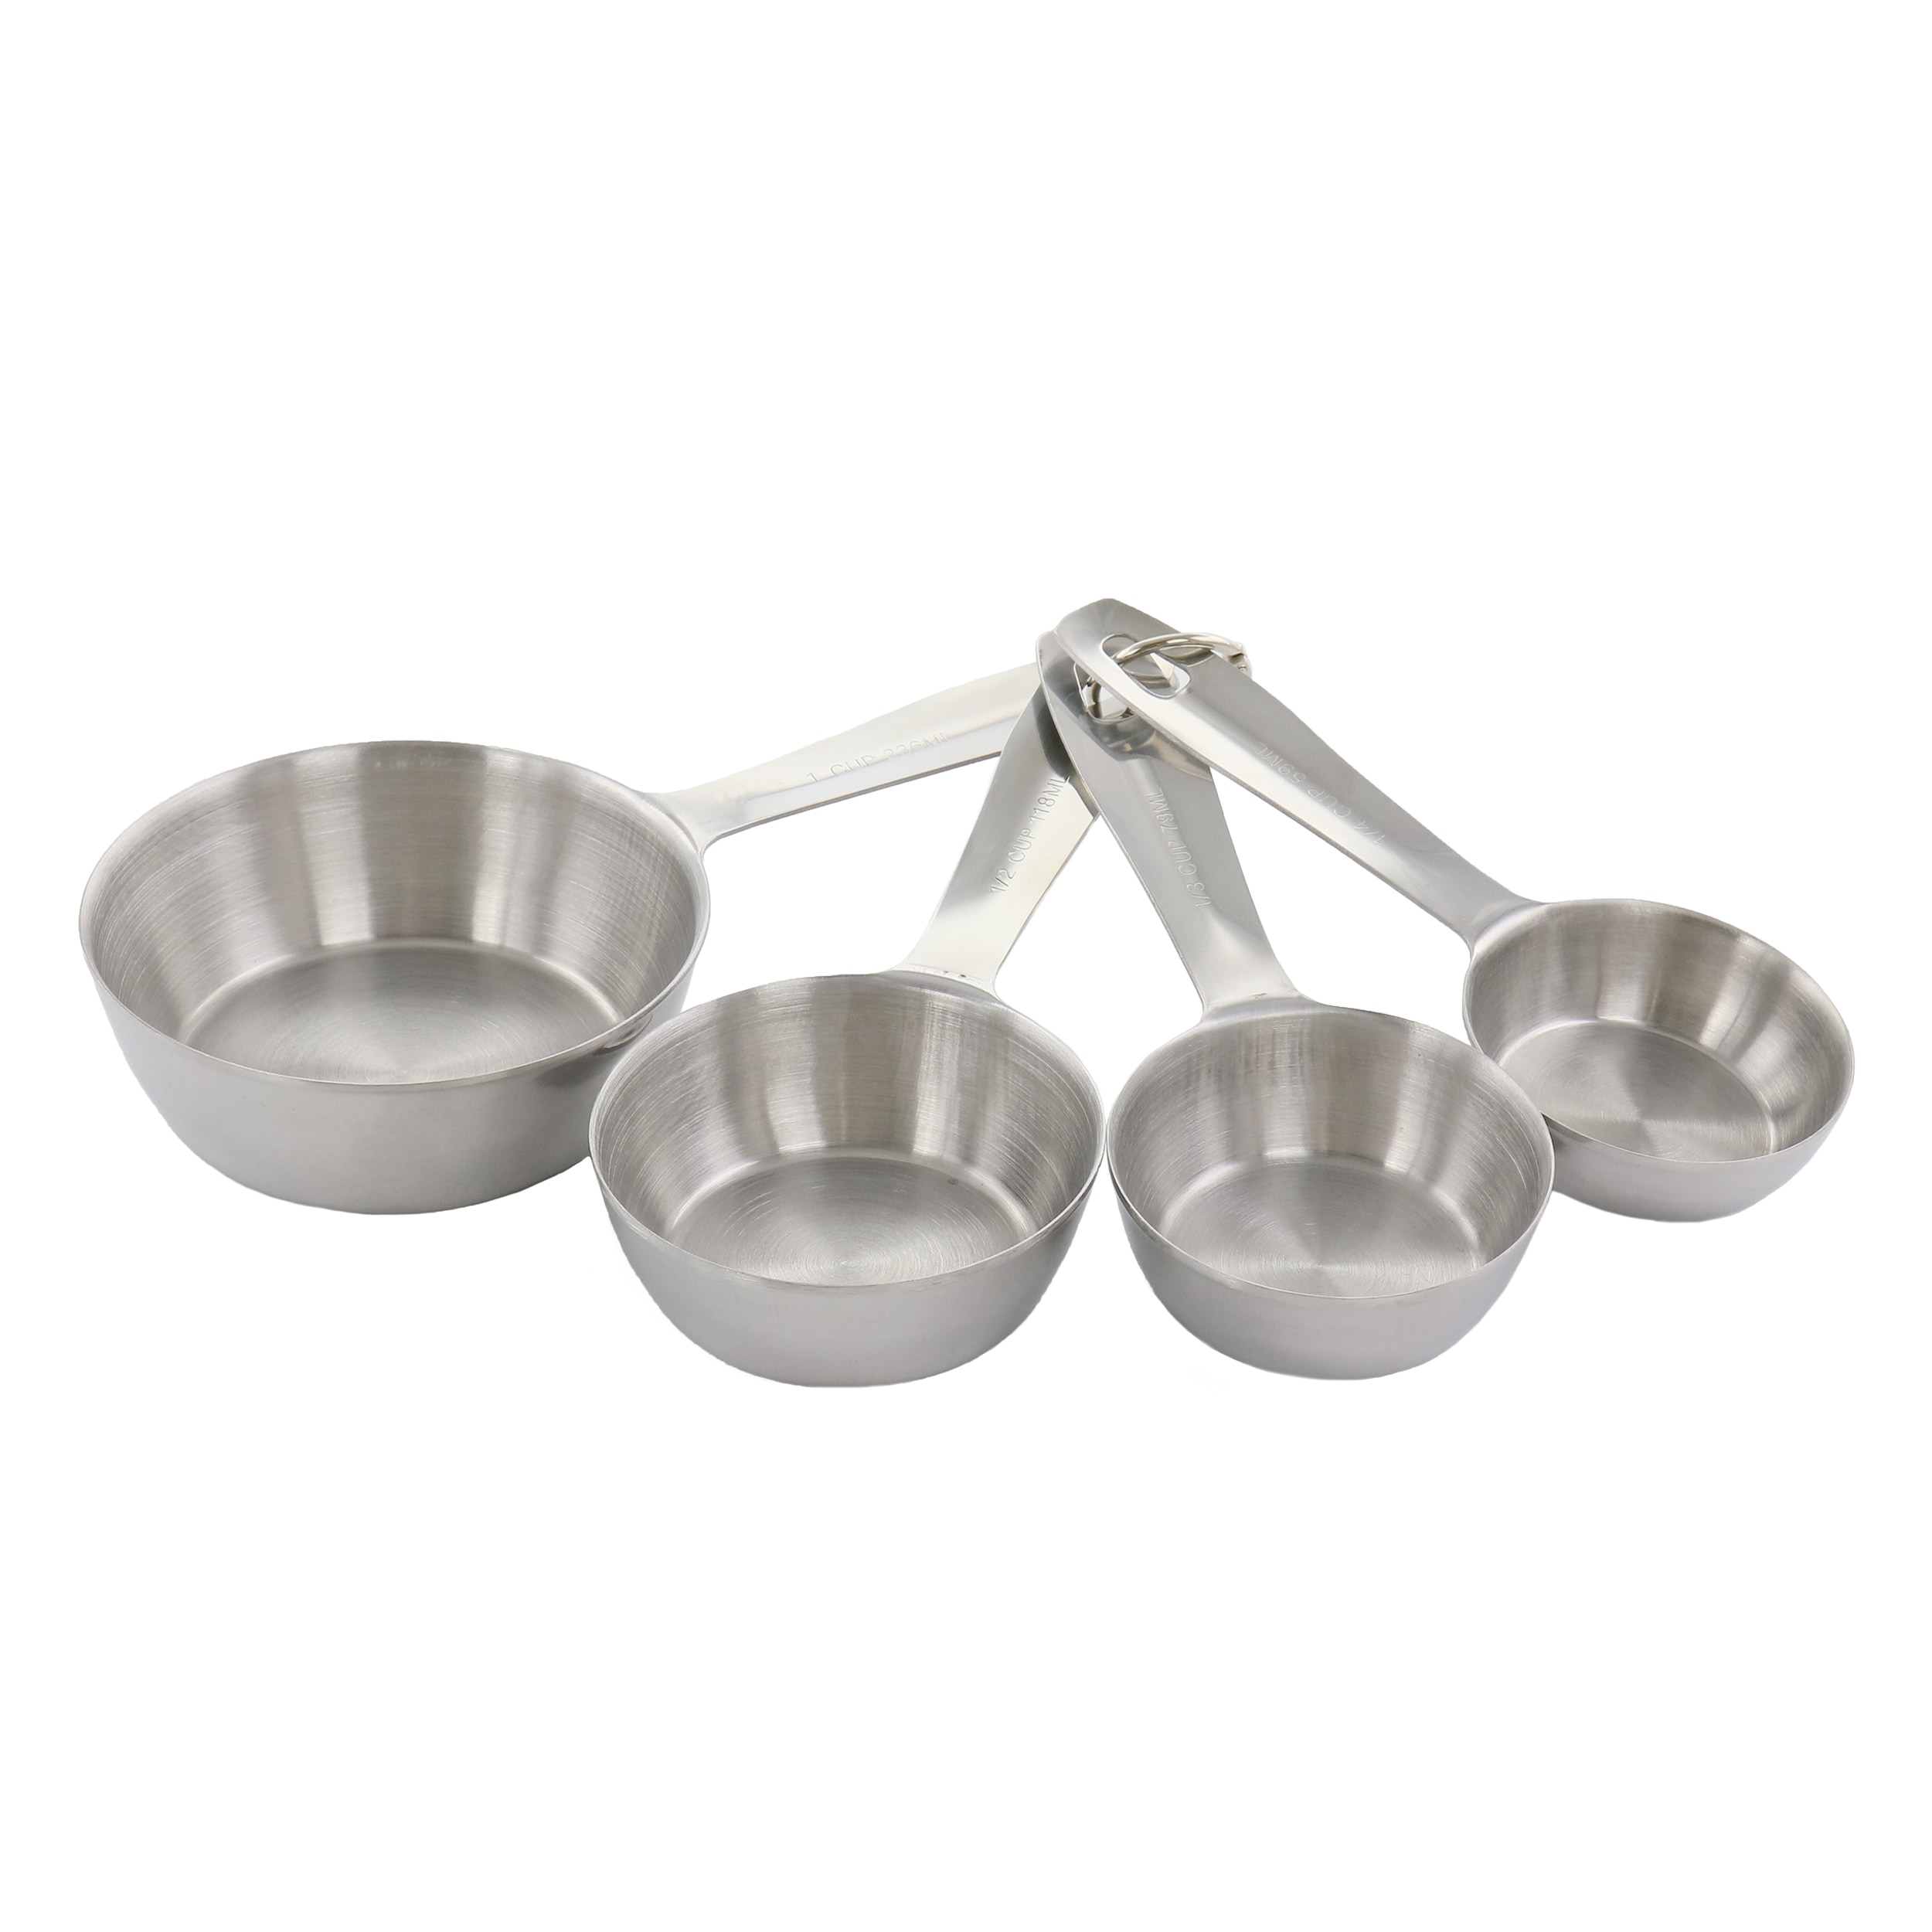 https://ak1.ostkcdn.com/images/products/is/images/direct/ccf7a9ff4506895223852d8ca1acb4b6631747ba/Oster-Baldwyn-4-Piece-Stainless-Steel-Measuring-Cup-Set.jpg